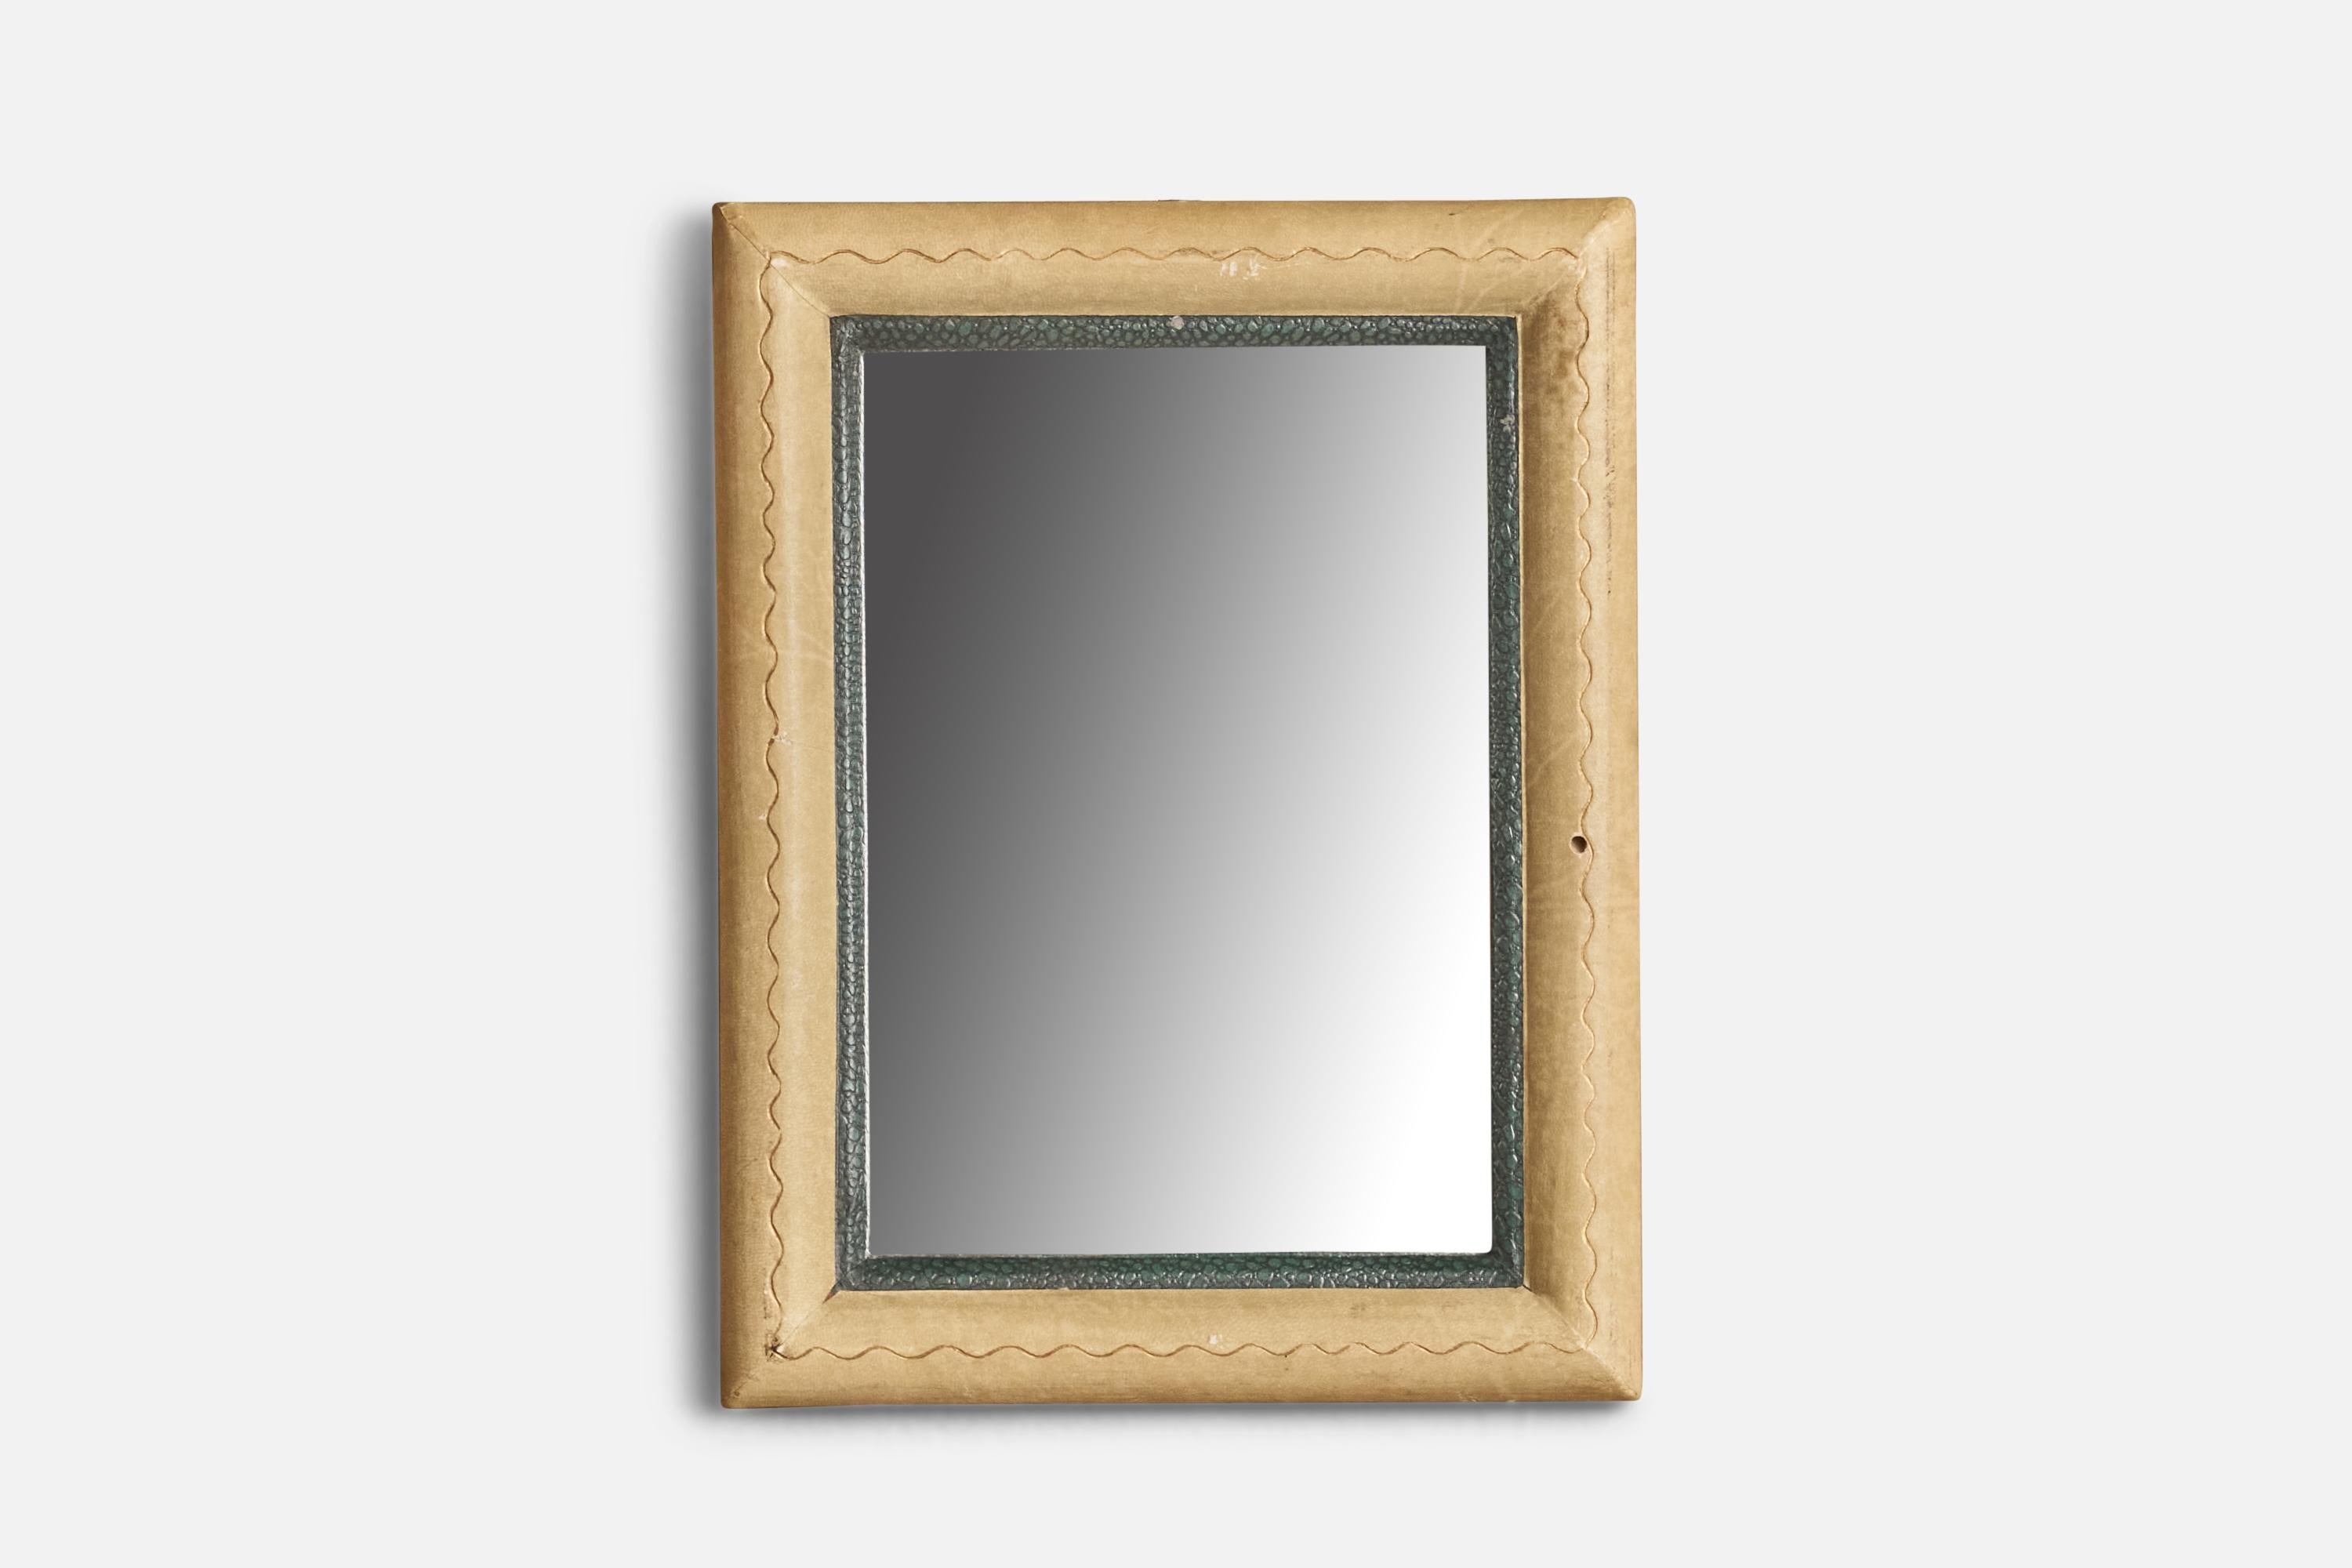 A beige and green parchment paper wall mirror designed and produced in Italy, 1940s.